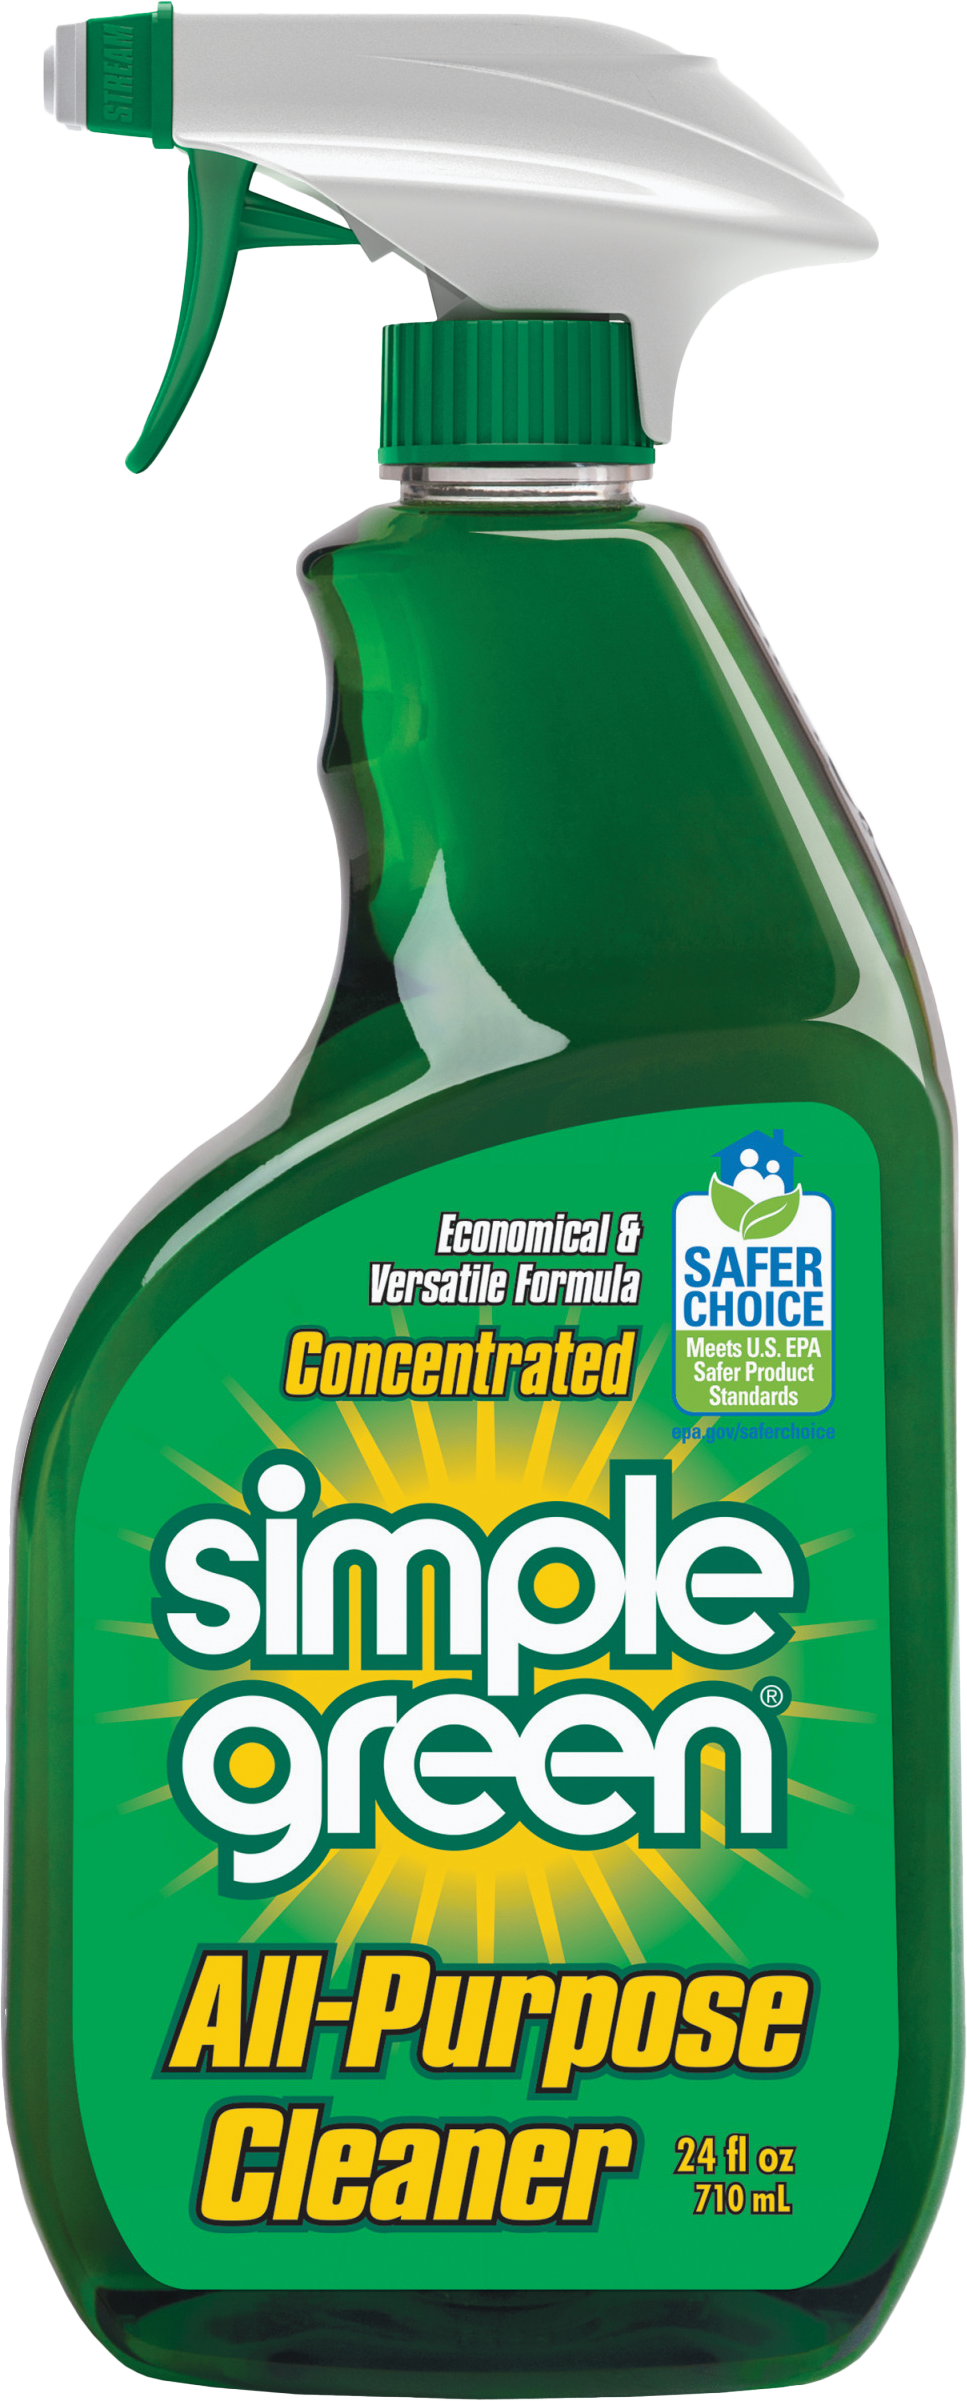 Cleaner-Degreaser Concentrate - All Purpose Cleaner Used to